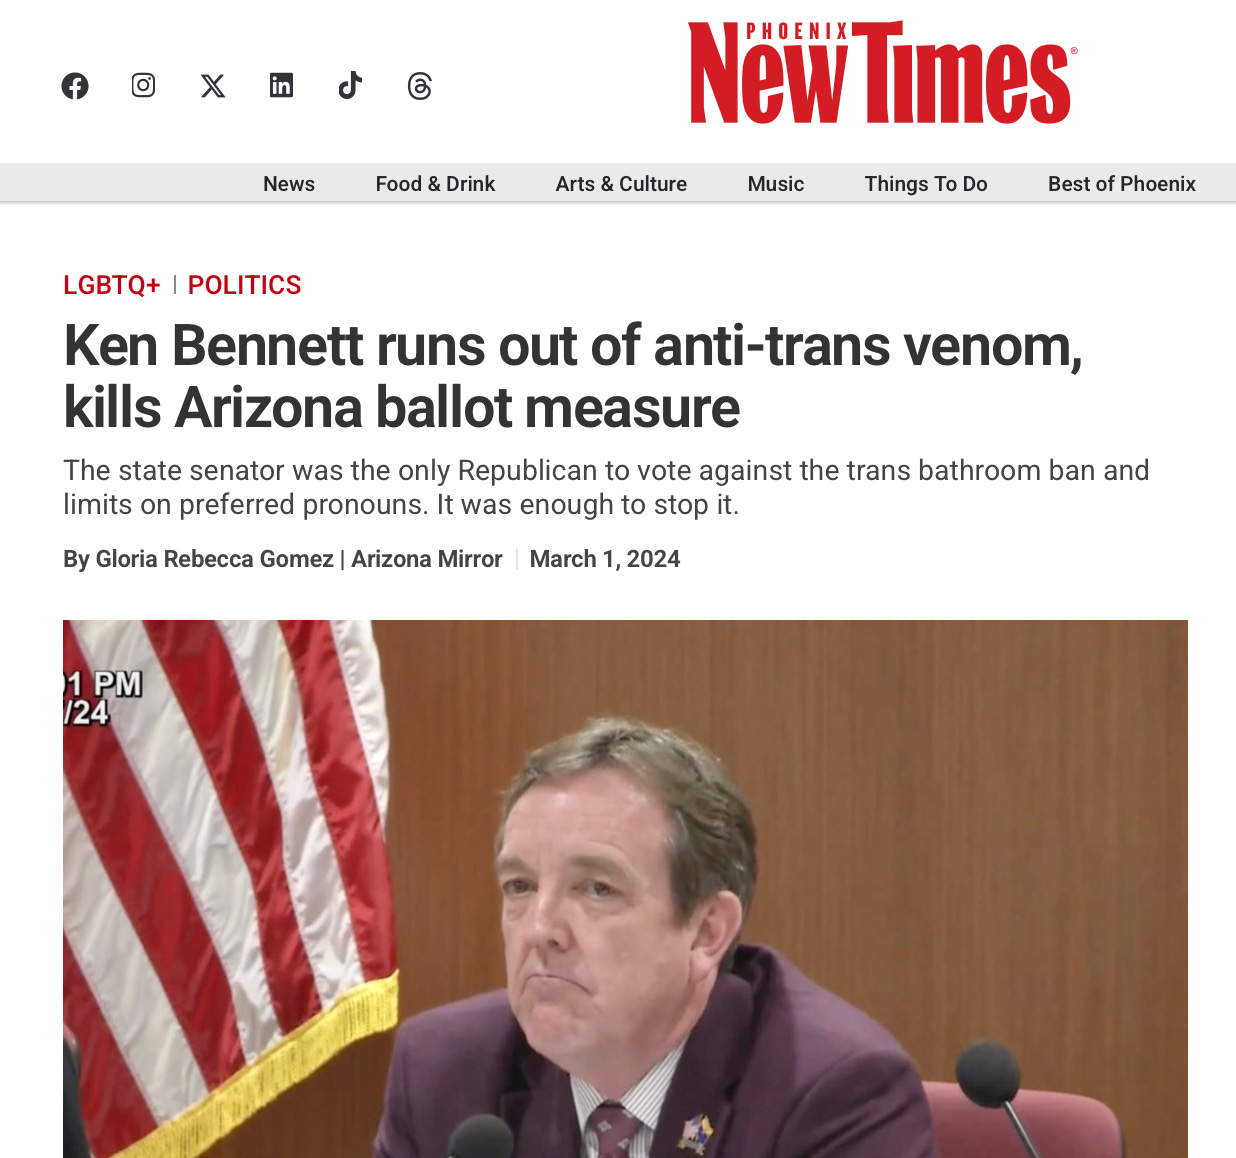 Phoenix New Times Headline about Ken Bennet killing anti-trans bill with photo of Bennet looking teary